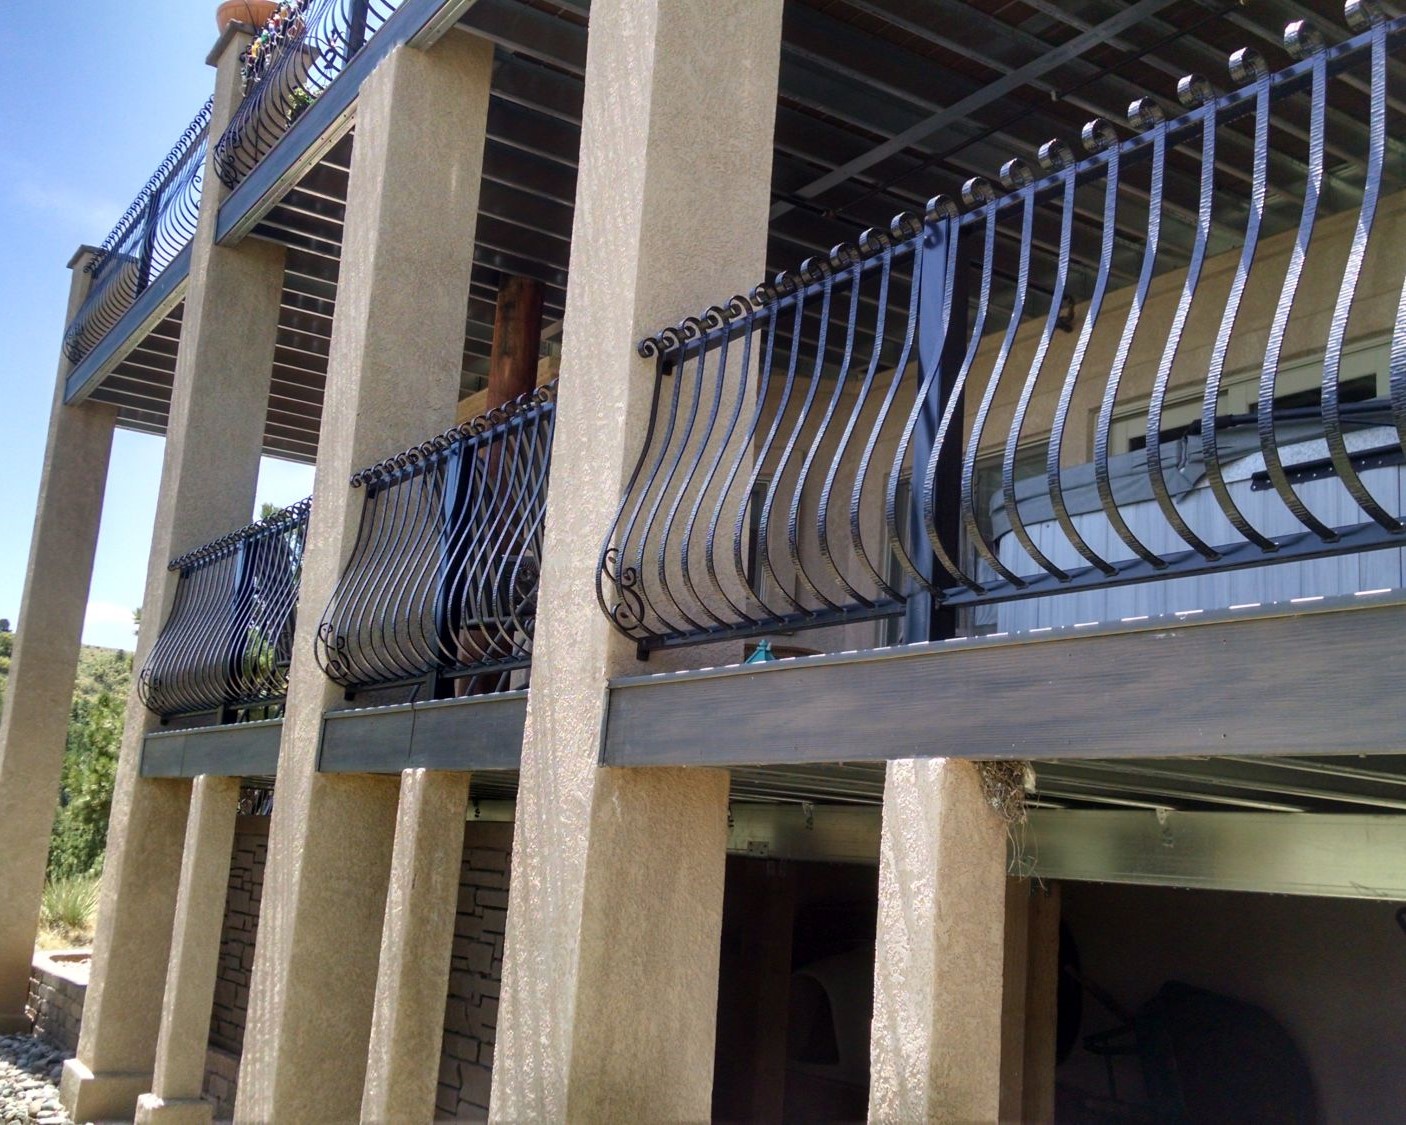 Two elevated, composite decks that were built with a wrought iron railing that has Vienna style balusters.